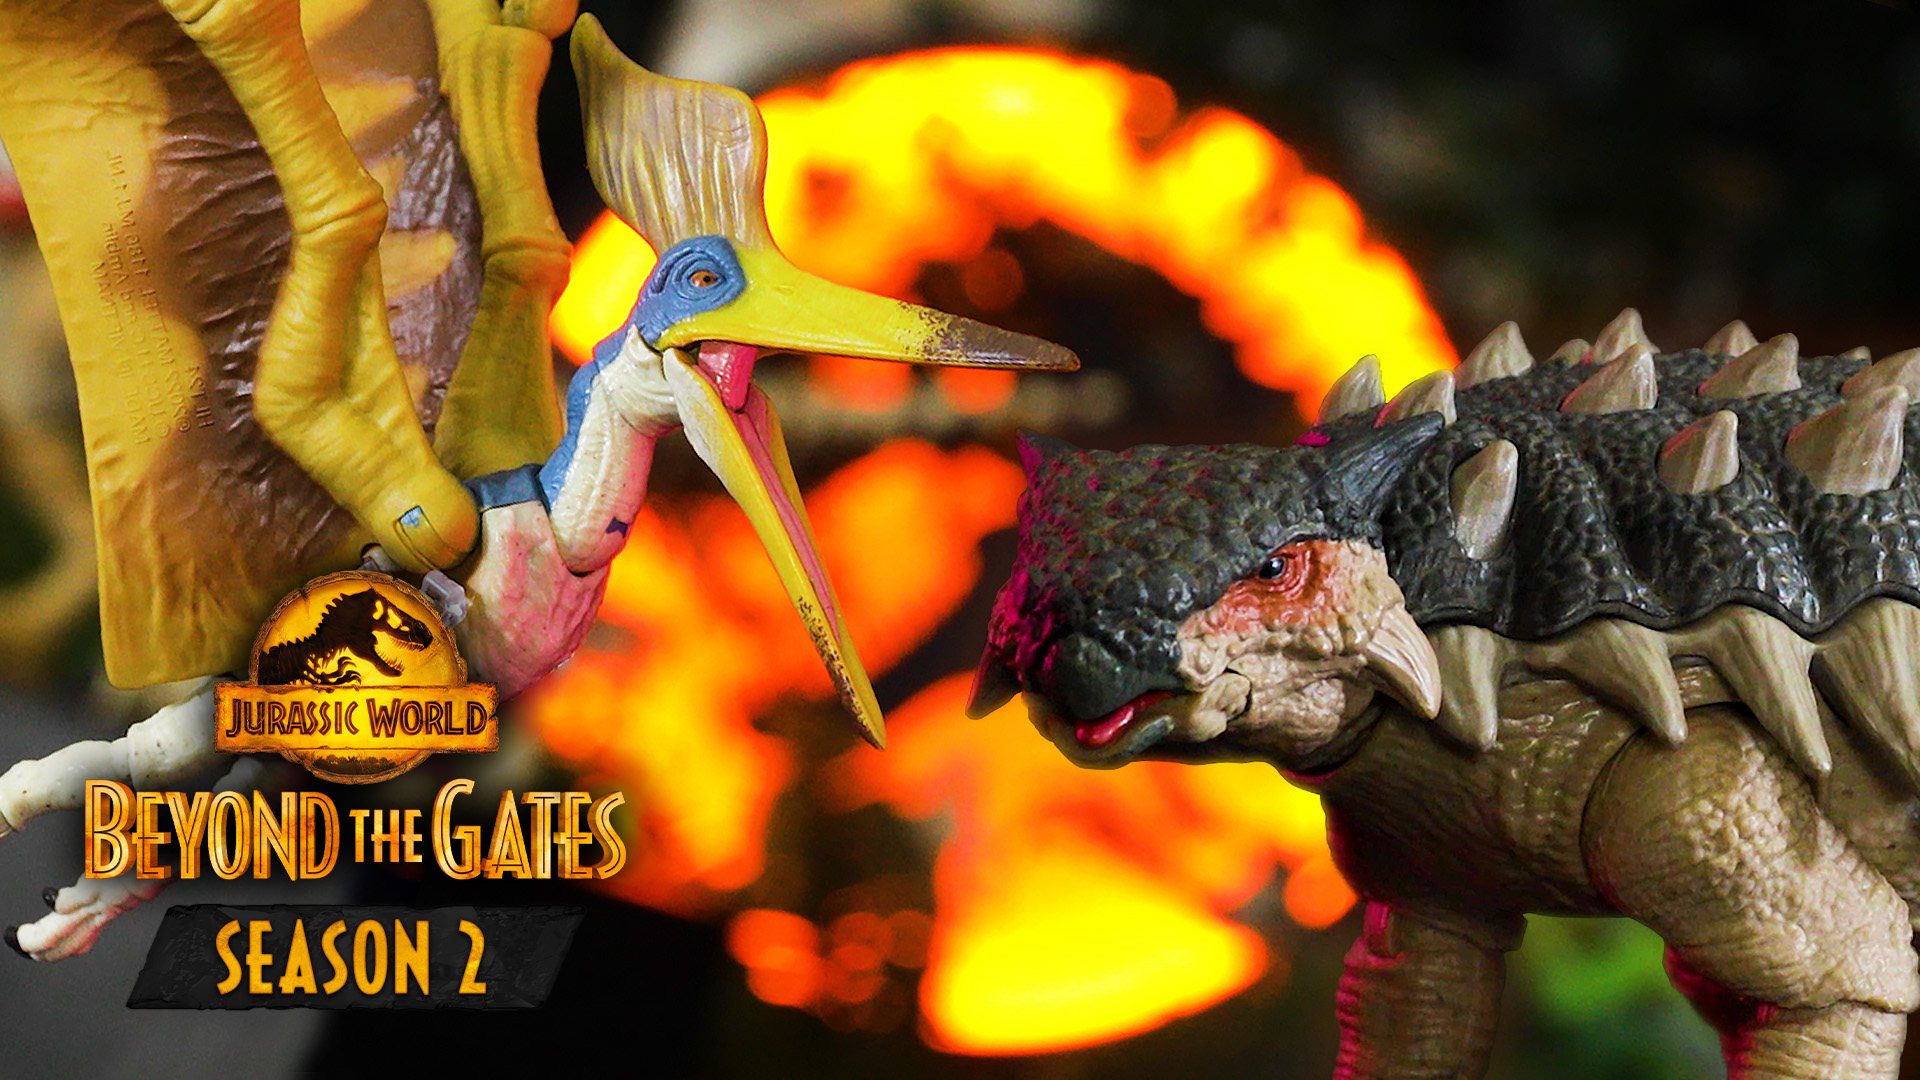 Ankylosaurus & Geosternbergia Join The Hammond Collection in Latest Beyond The Gates Episode!